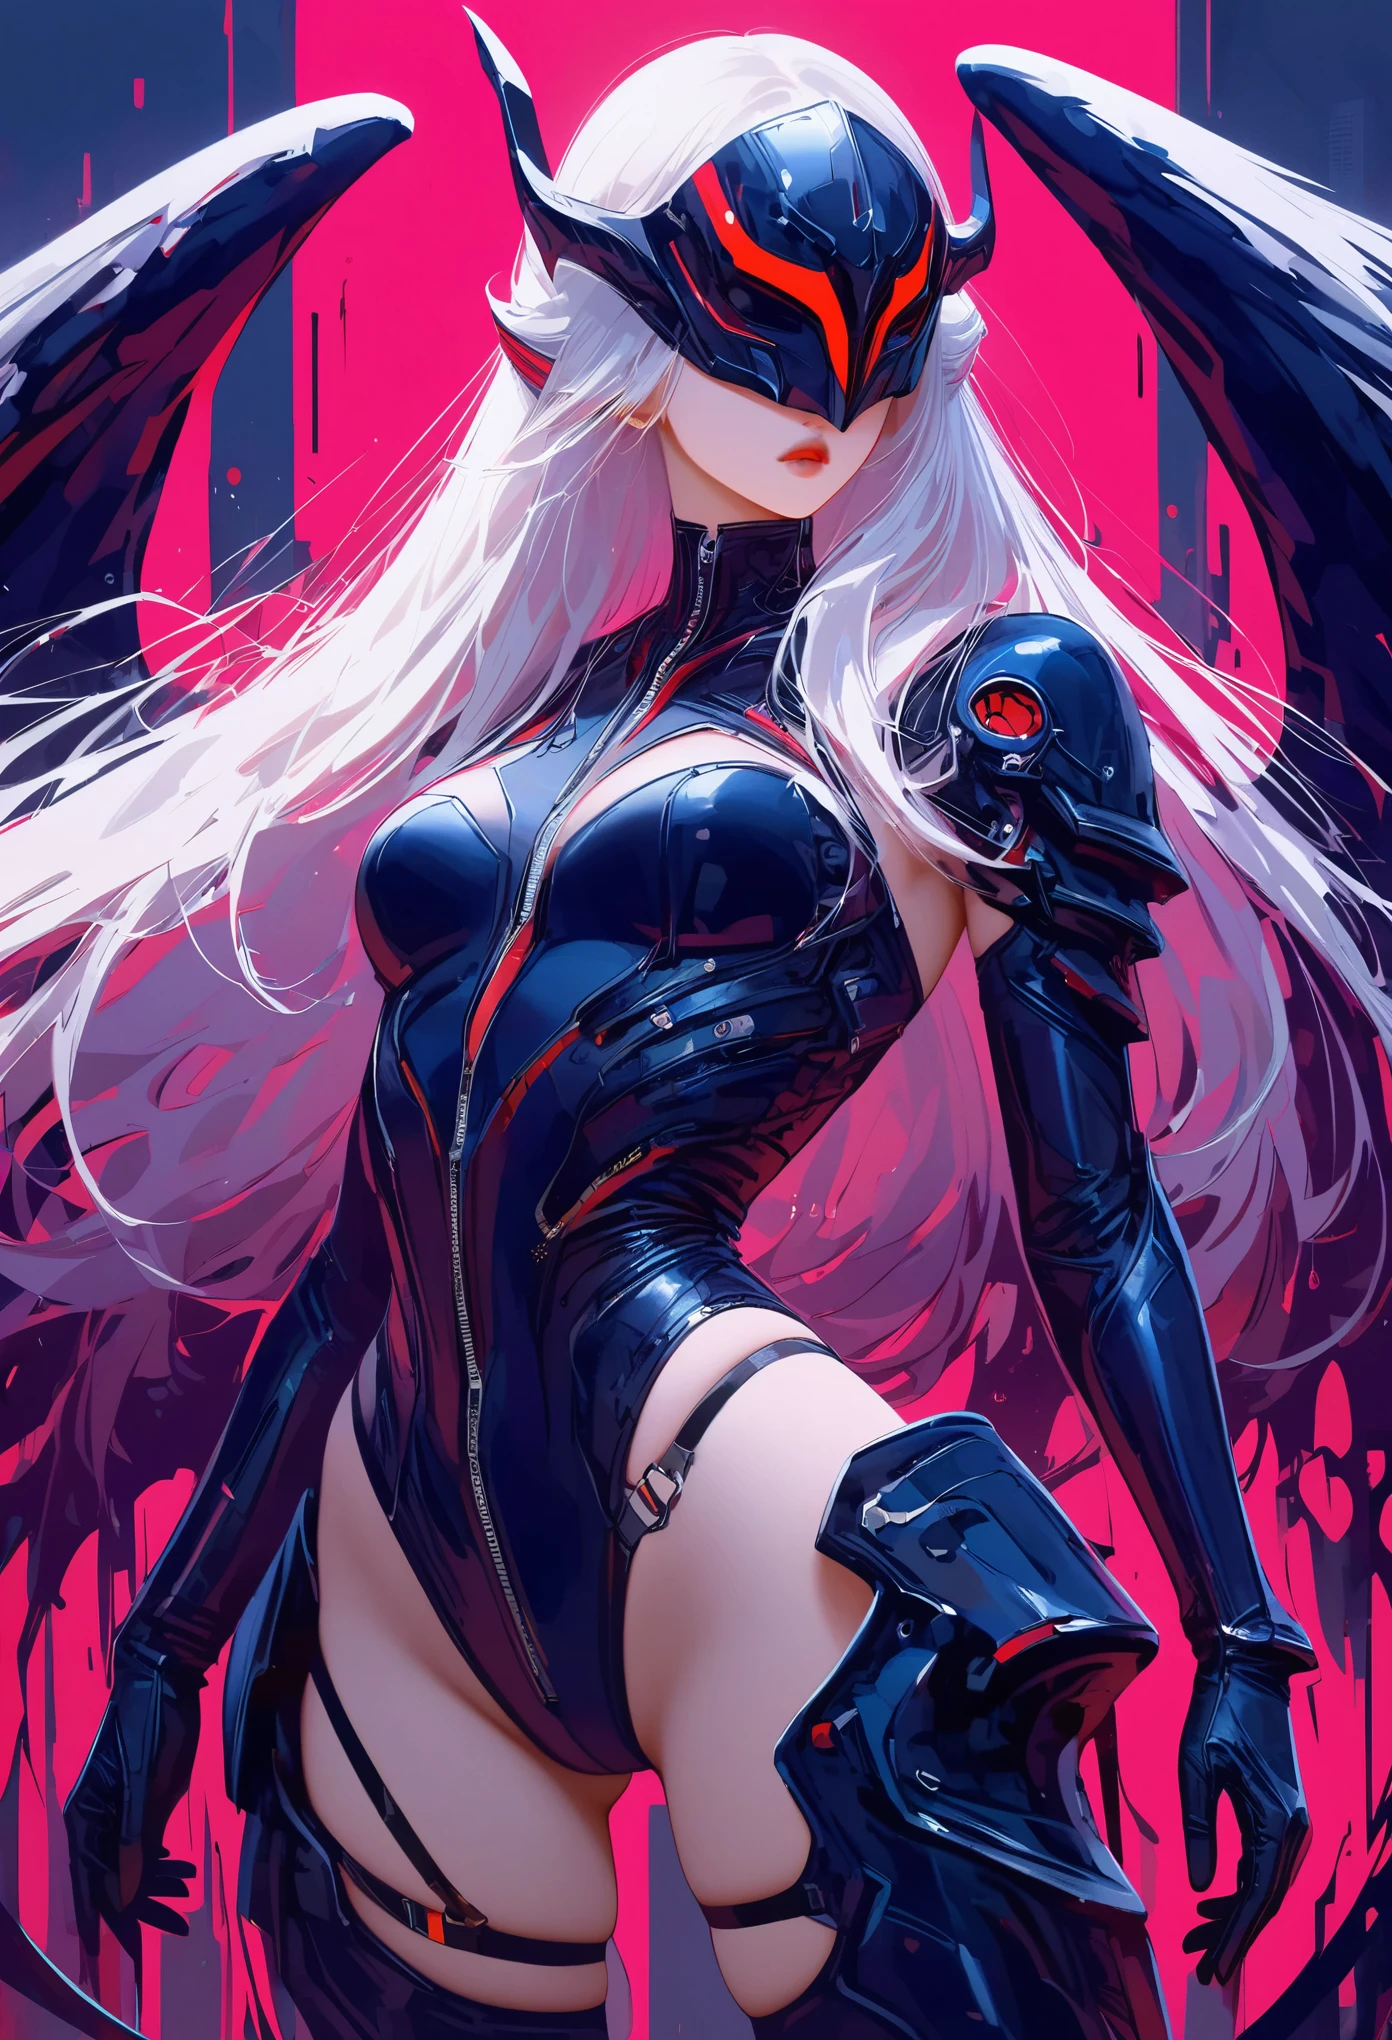 masterpiece， best quality， 8k， number， 1 girl， alone， stand up， youth， white hair， long white hair， hair accessories， Red eyes， round pupils， Emotionless expression， Bloodstained mechanical parts， electric wire， cable， failure effect， scary， Science fiction， futuristic， The background is darker inside， neon lights， Cyberpunk characters， surreal， strange， Disturbing， spine-chilling， scary， One-piece Pants，Red eyes，Venom Possession，blackened，Long black gloves，Rompers，Tight latex jumpsuit，Highlight her graceful figure,Wrap your whole body and stand up，symbiont，（（Raised sexy）），One-piece Pants，Red eyes，Venom Possession，blackened，Long black gloves，Rompers，Black latex clothing，Blood-Red eyes，best quality, High resolution, super detailed, Vivid texture, mask, Tight latex jumpsuit, bangs,purple hair, Blue eyes